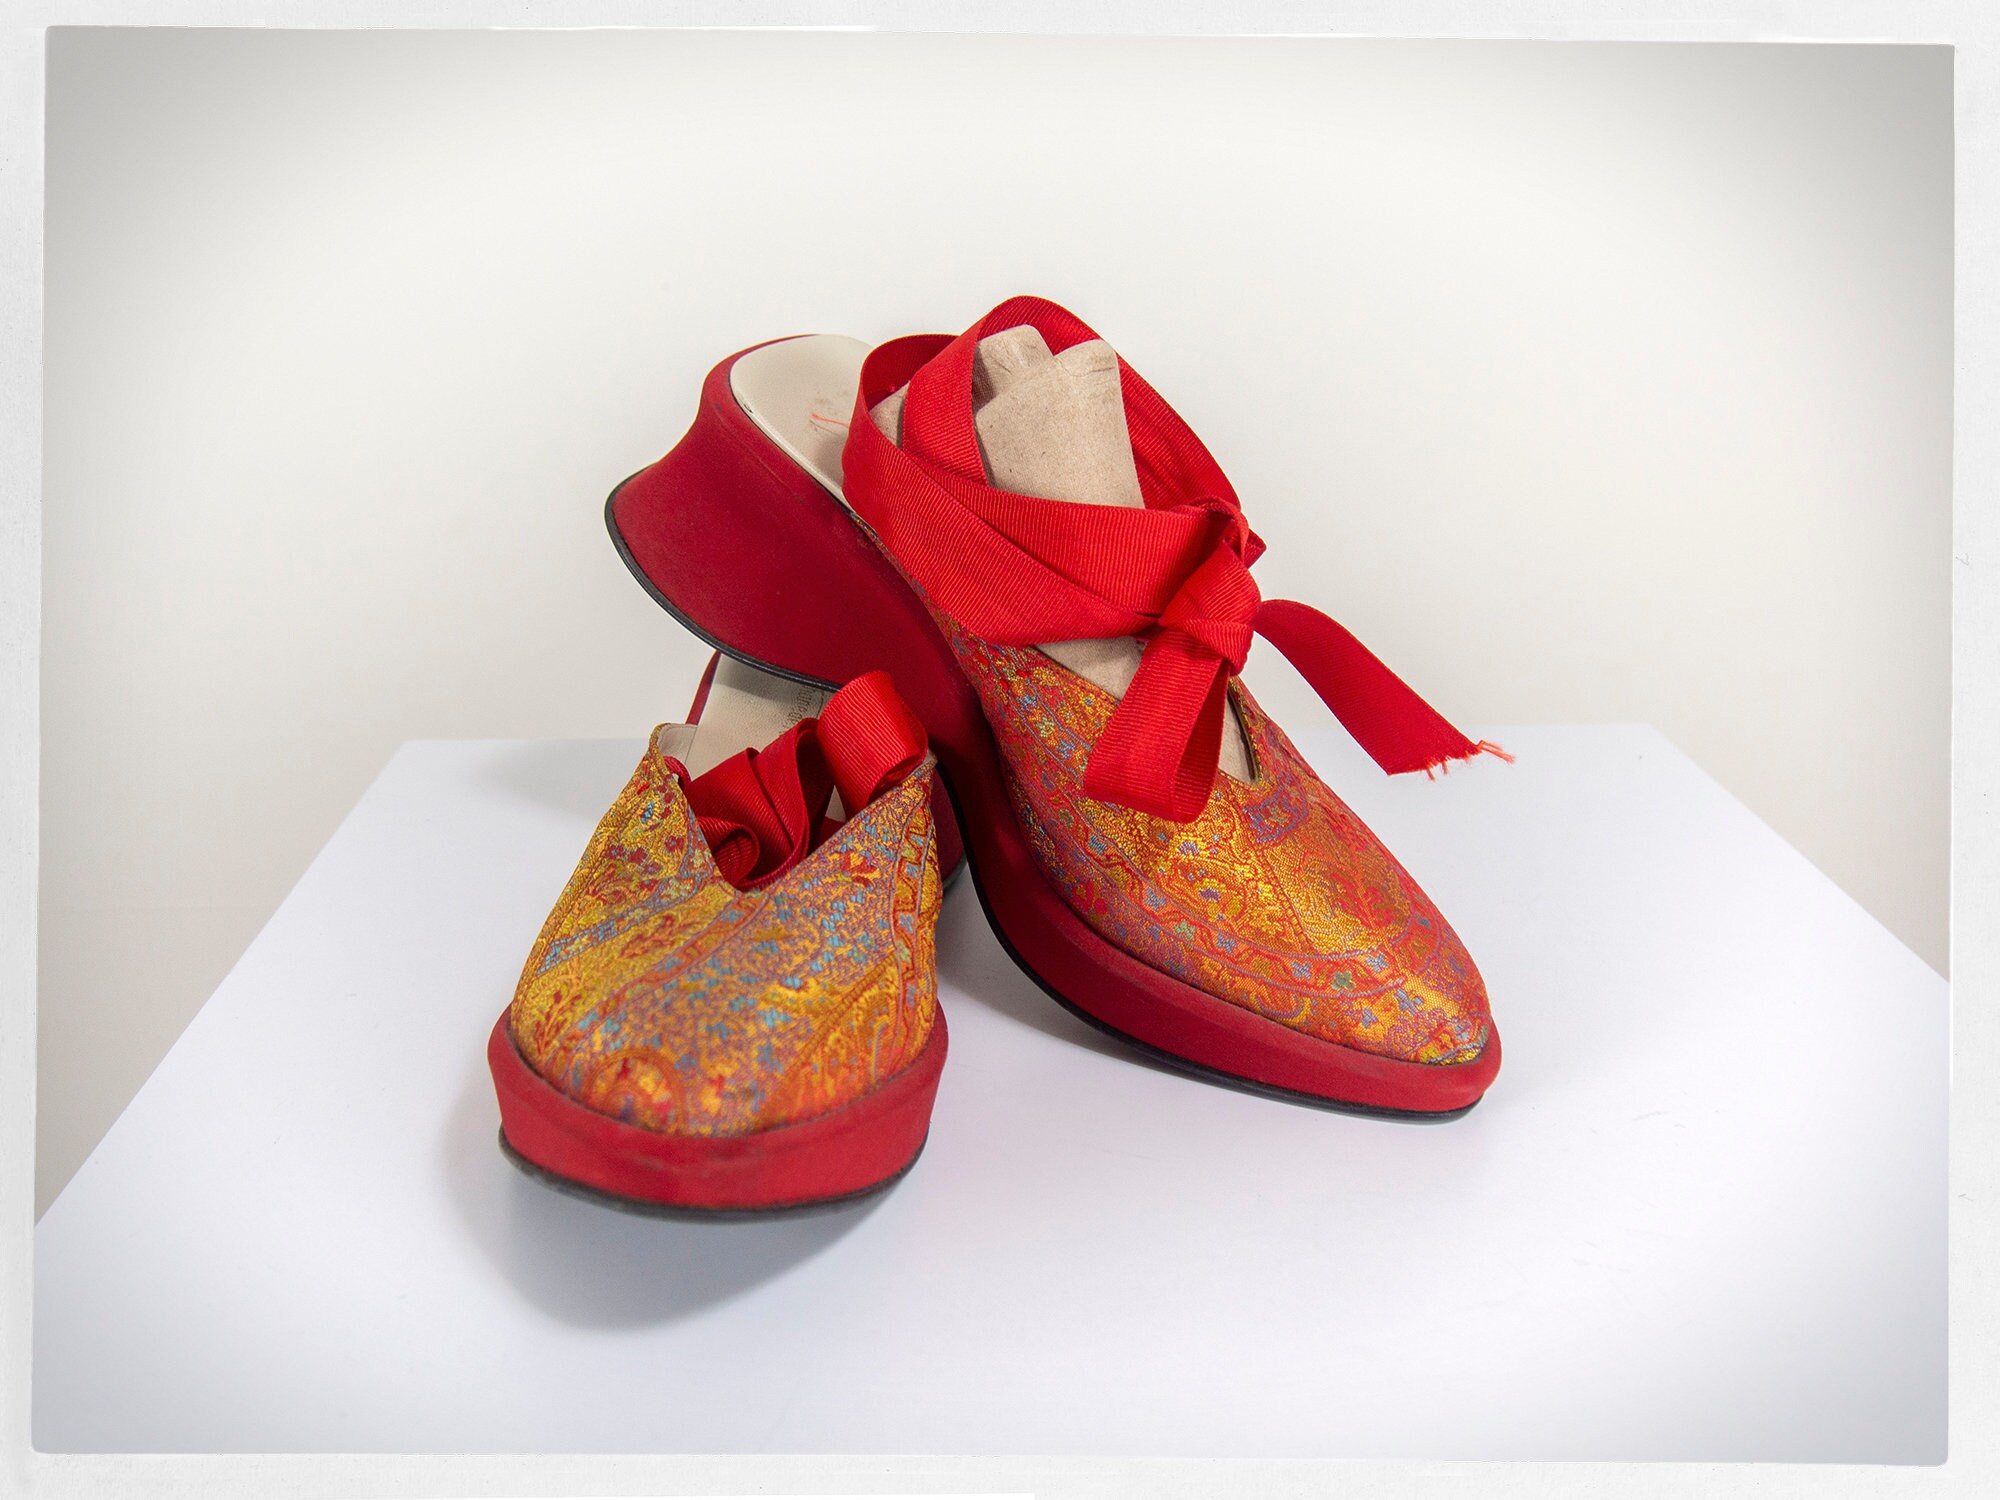 Vintage 90s Shoes 90s BROCADE Mules Exotic Brocade Shoes 